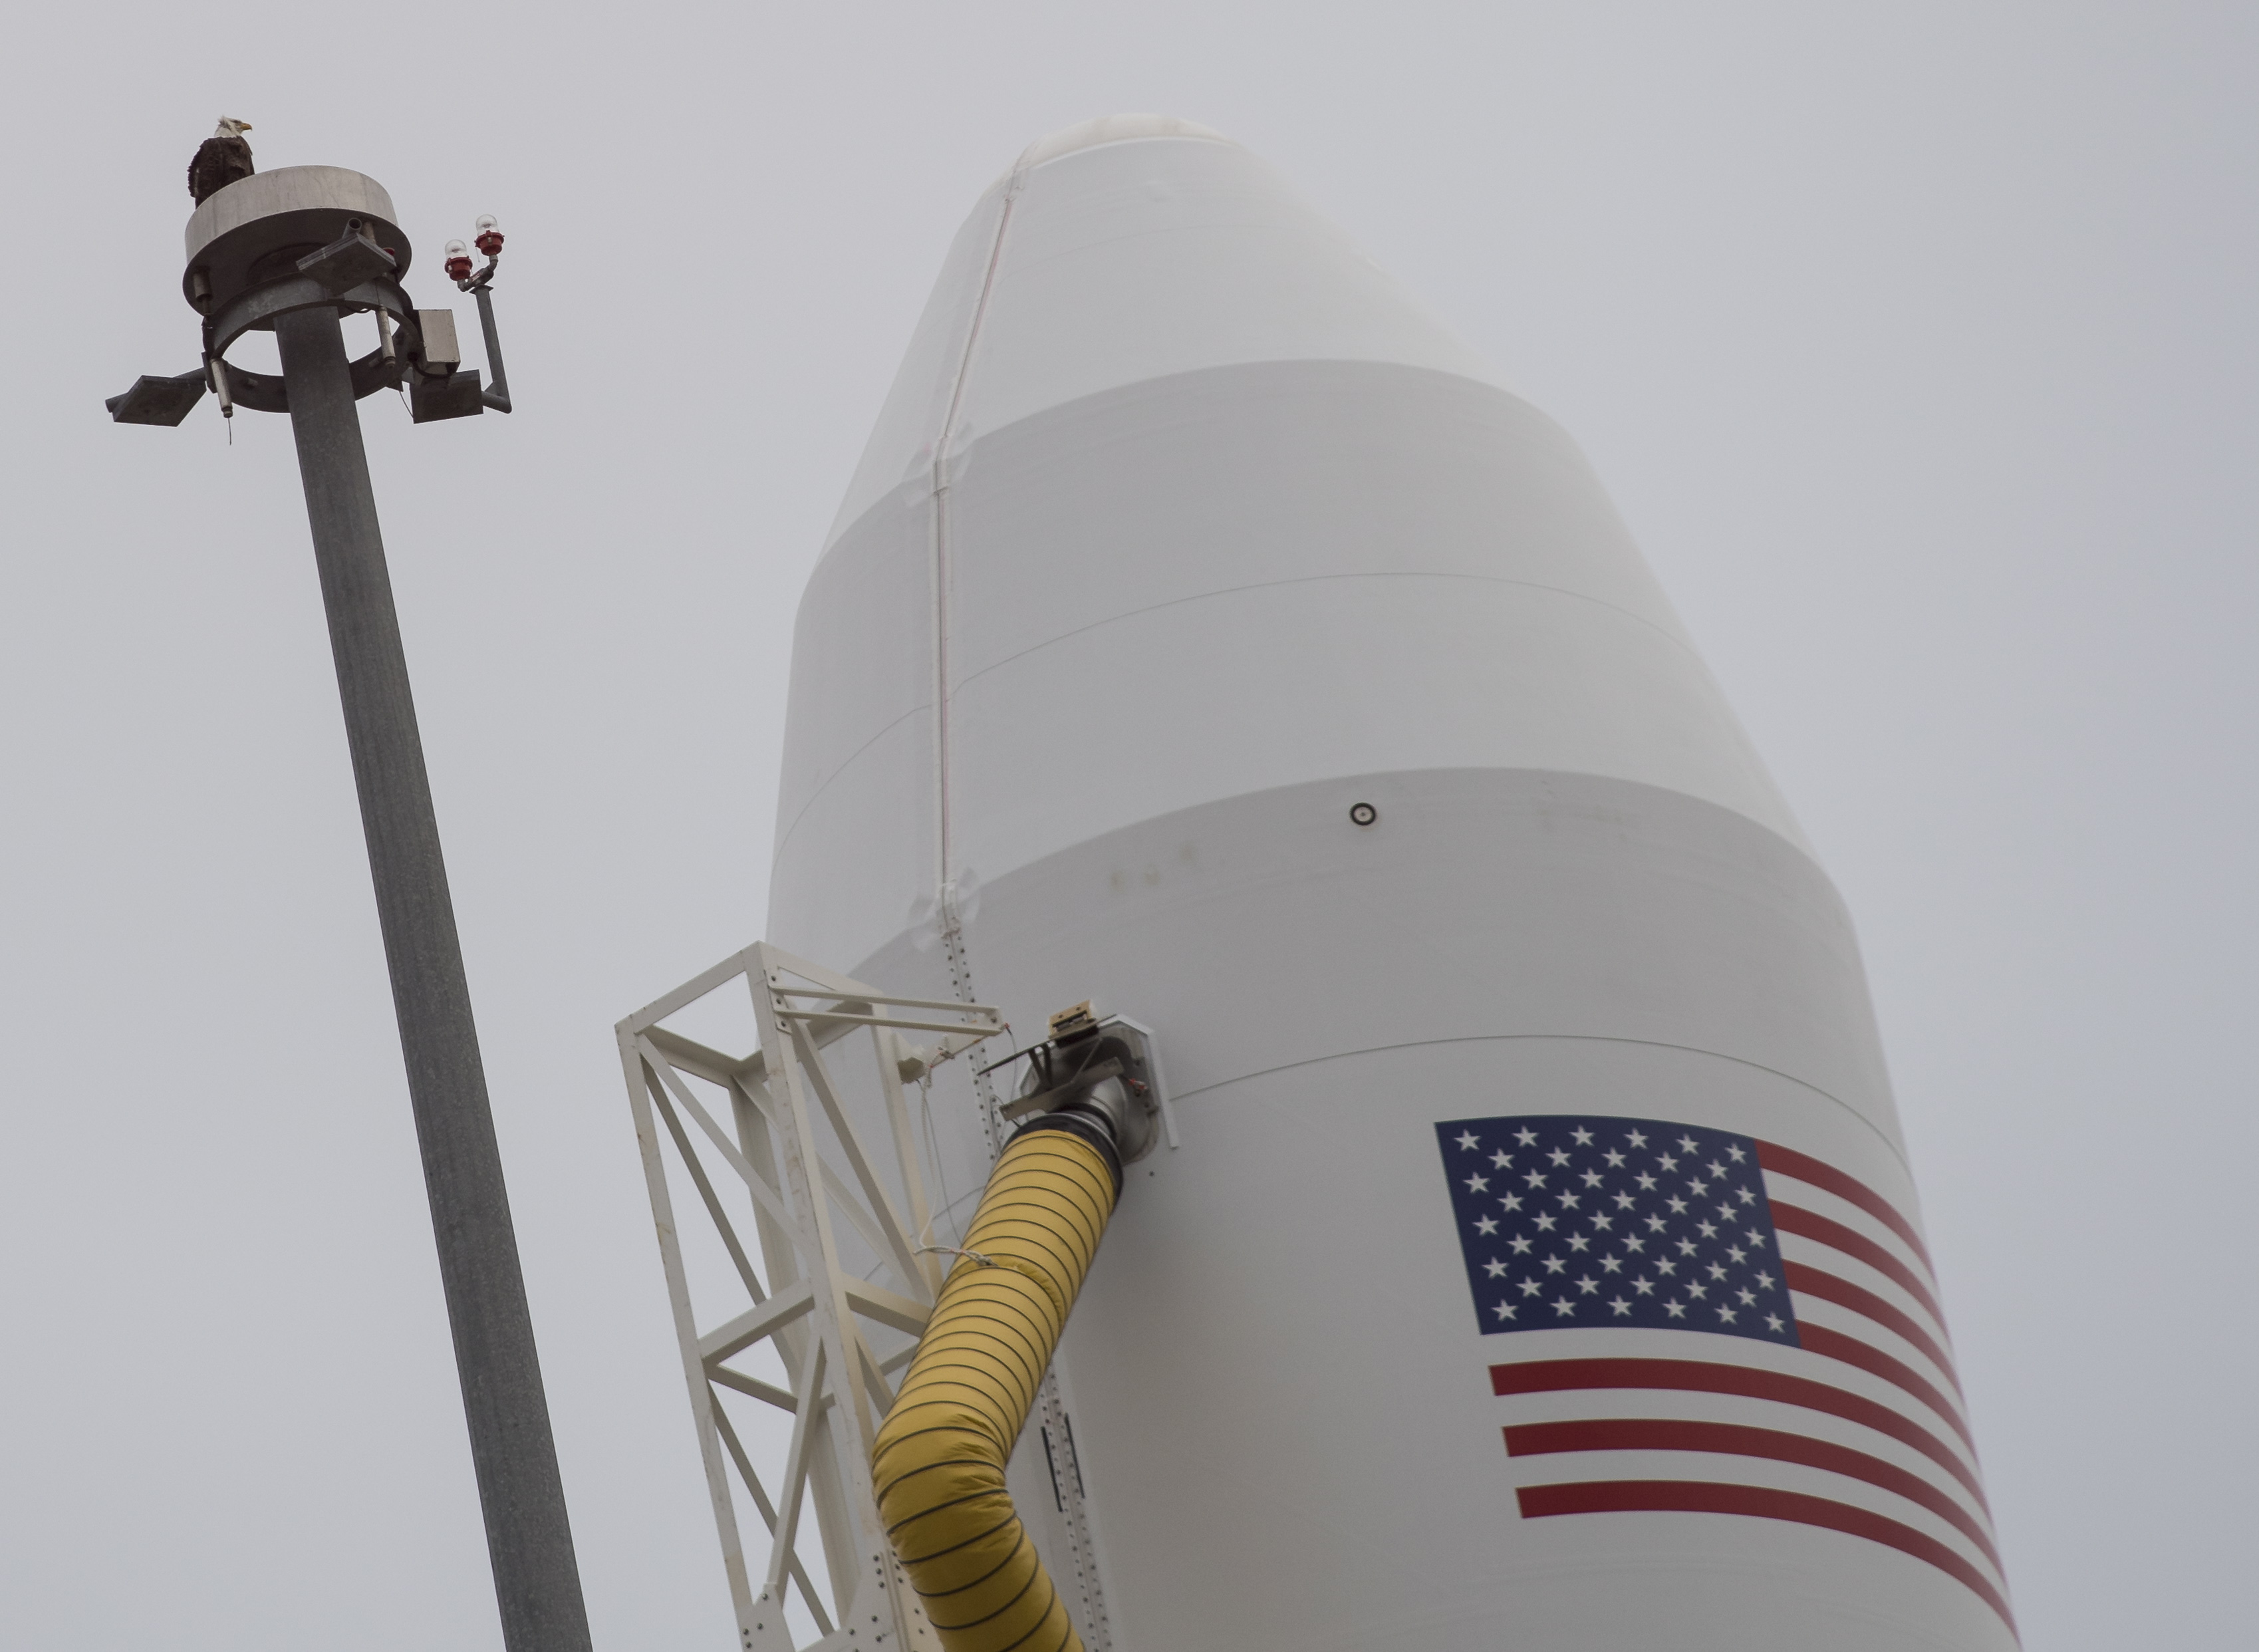 epa07166041 A handout photo made available by NASA shows a bald eagle atop a lightning tower next to the Northrop Grumman Antares rocket with, Cygnus spacecraft onboard, on Pad-0A, at NASA's Wallops Flight Facility in Wallops Island, Virginia, USA, 14 November 2018. Northrop Grumman's 10th contracted cargo resupply mission for NASA to the International Space Station will deliver about 7,400 pounds of science and research, crew supplies and vehicle hardware to the orbital laboratory and its crew. Launch is currently scheduled for 16 November.  EPA/NASA/Joel Kowsky HANDOUT MANDATORY CREDIT: (NASA/Joel Kowsky) HANDOUT EDITORIAL USE ONLY/NO SALES